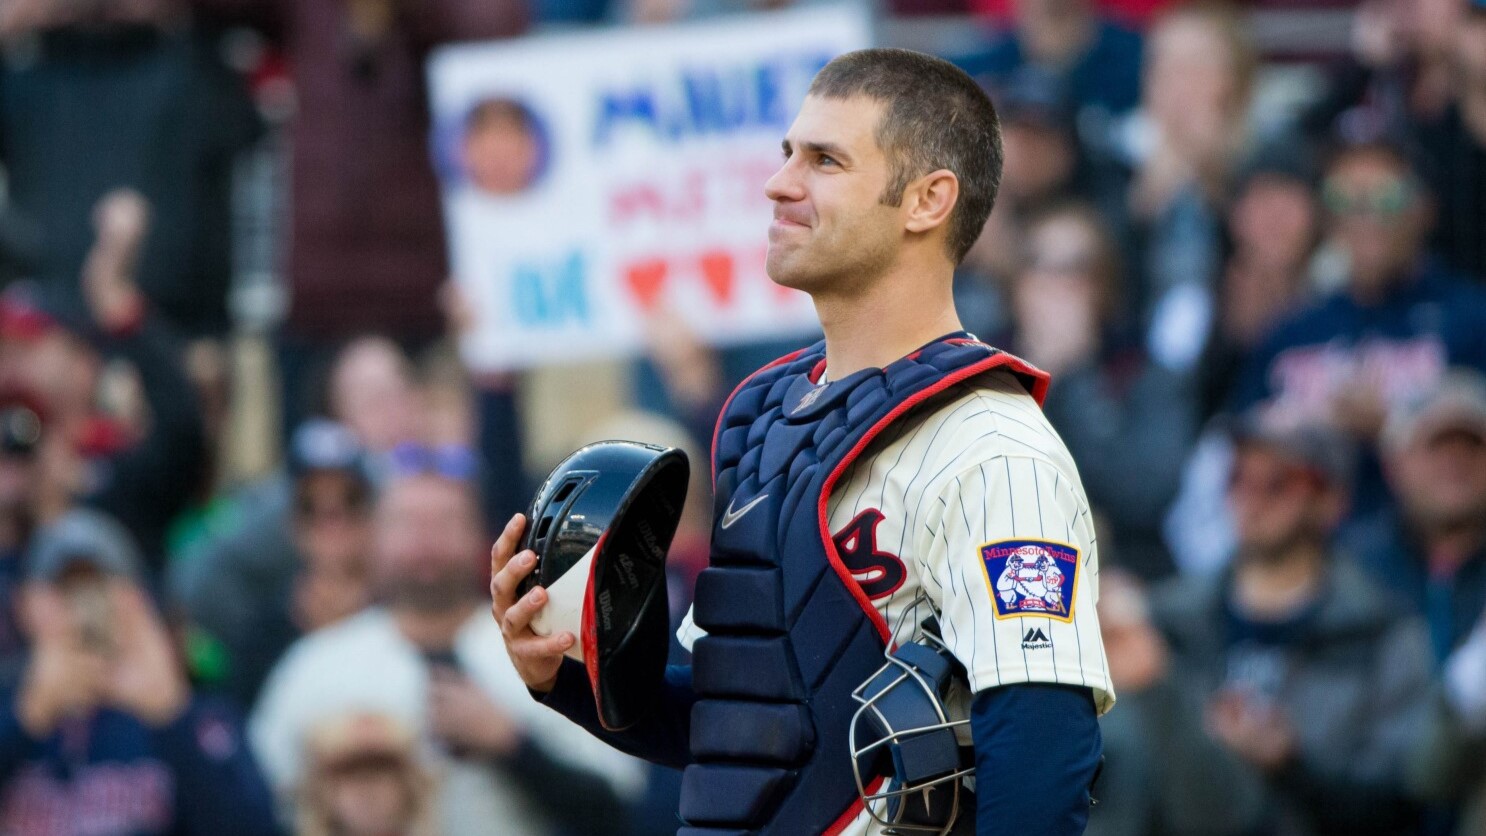 Joe Mauer elected to Twins Hall of Fame. Is Cooperstown next? – Twin Cities